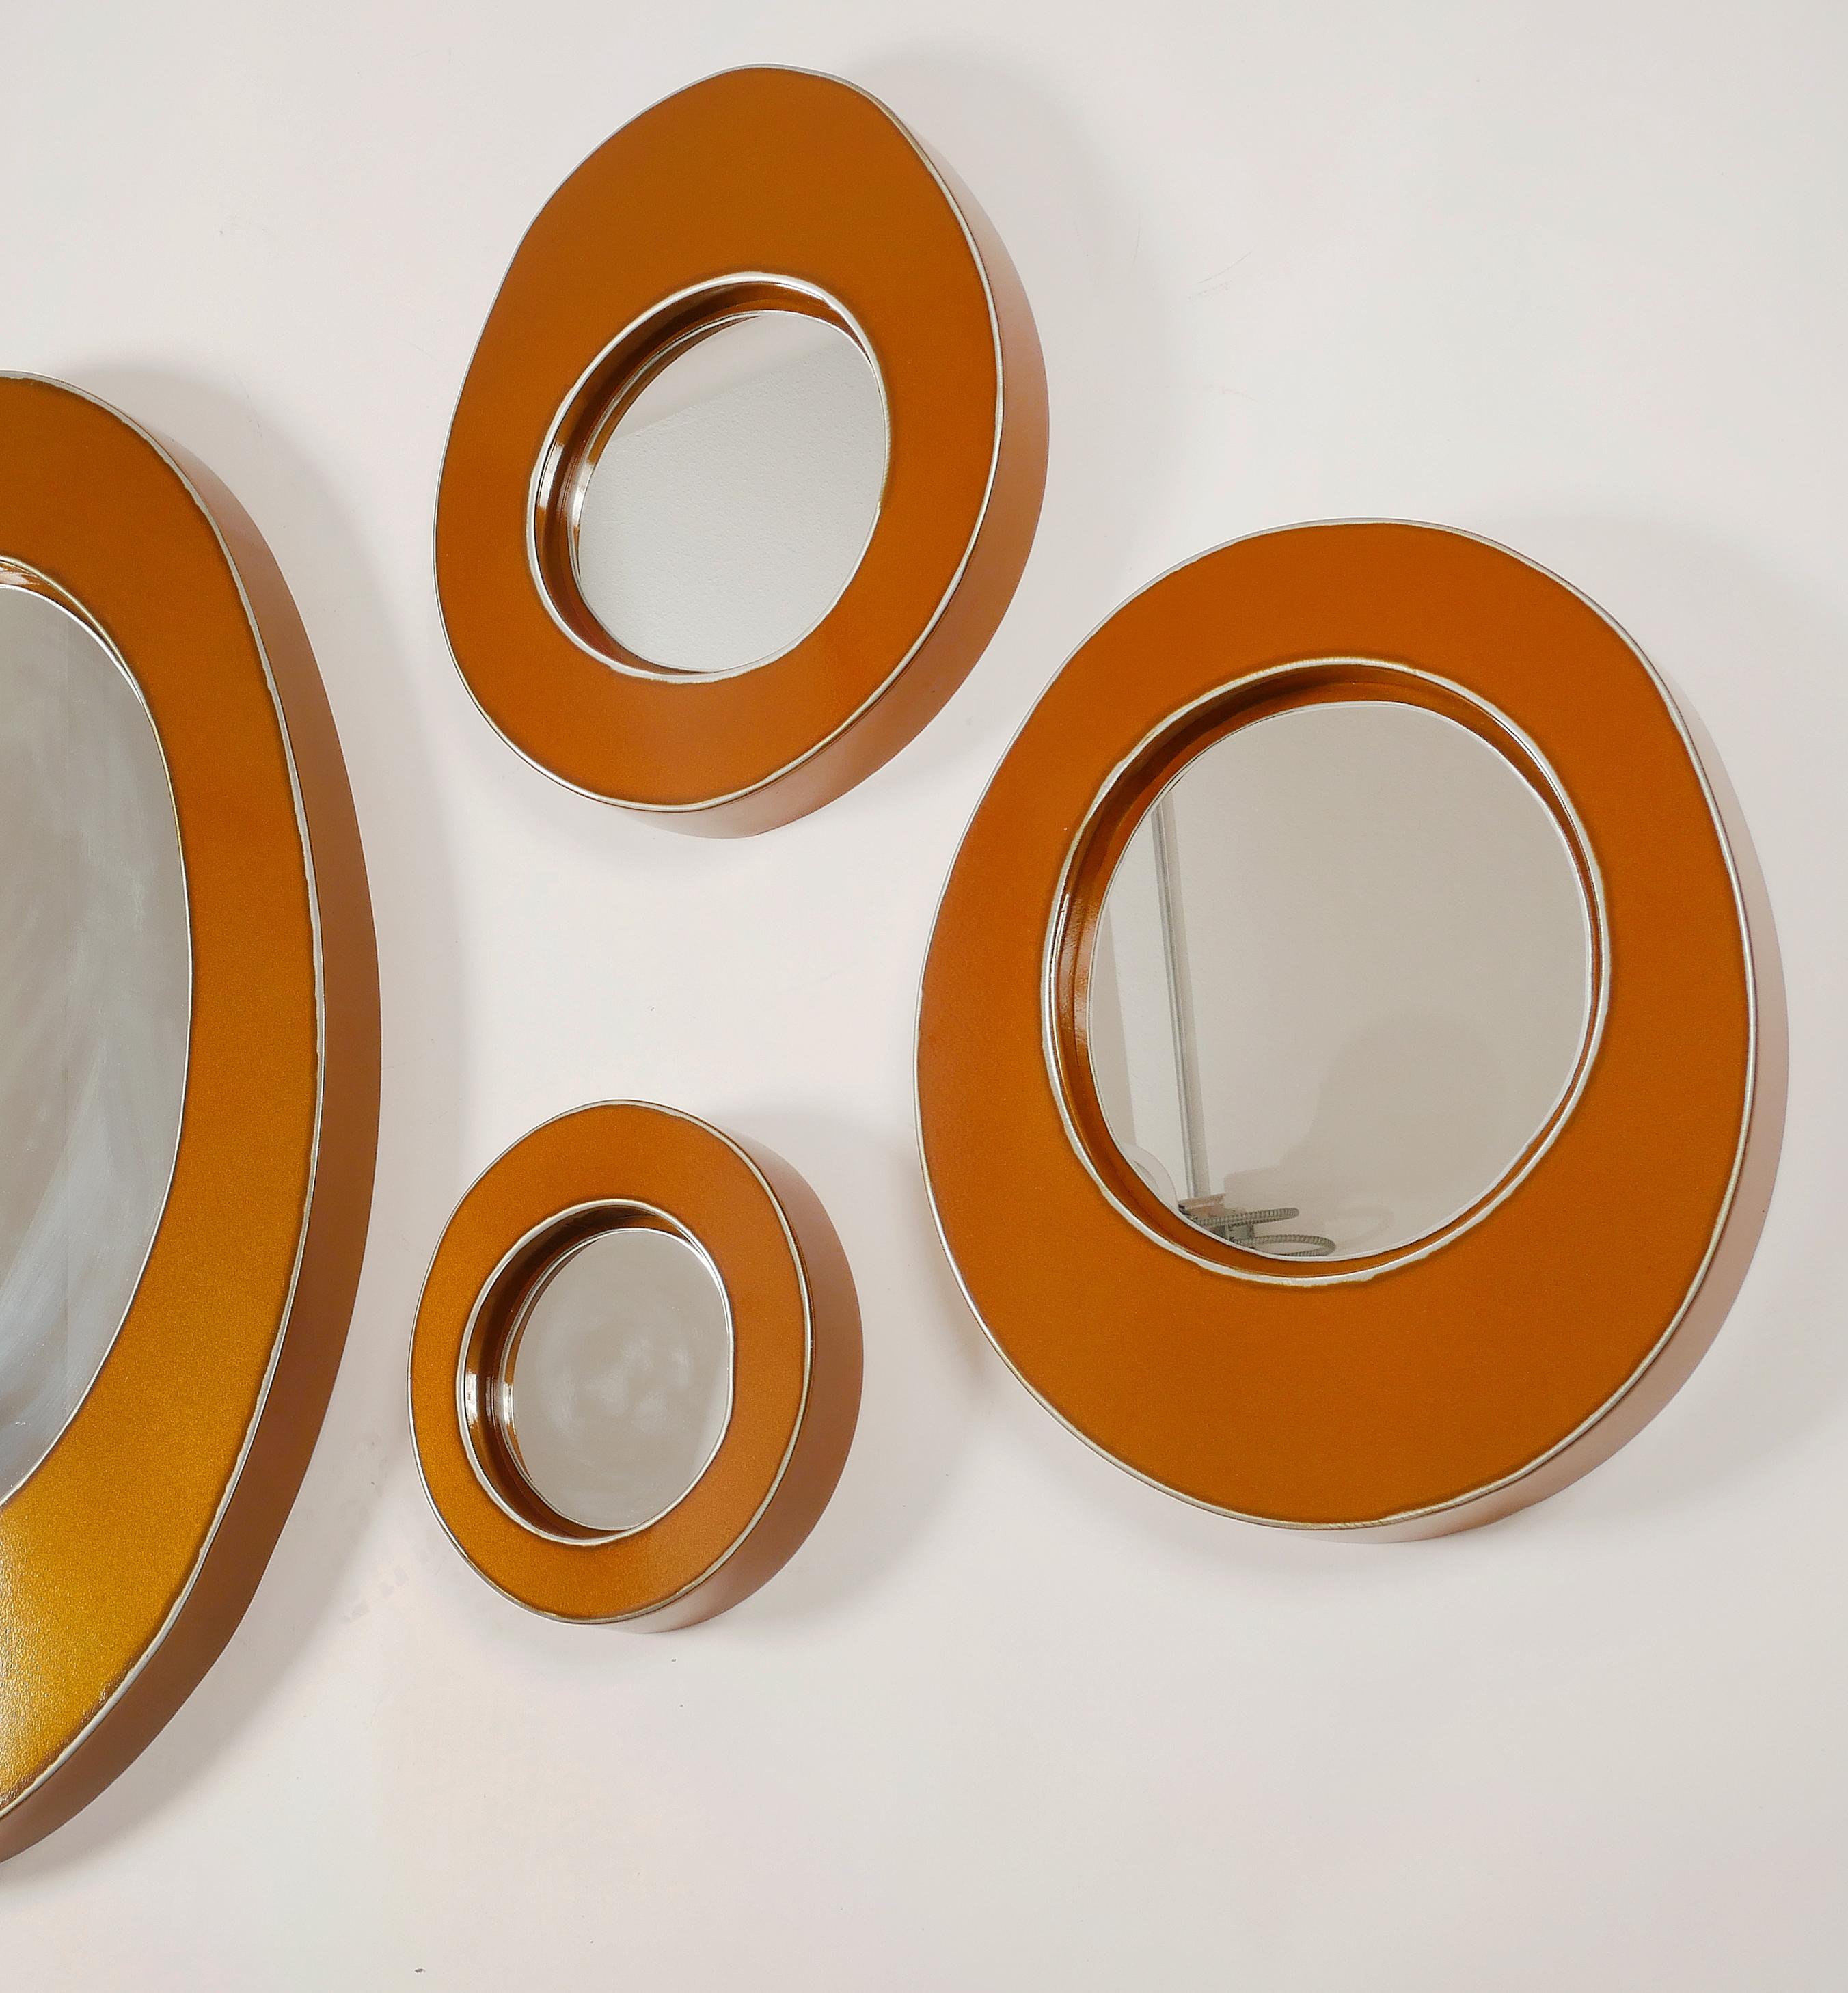 Bert Furnari Studio free-form abstract mirror group of 7

Offered for sale is a group of seven oval and round sculpted aluminum mirrors with a powder-coated orange/copper finish. The grouping can be arranged as desired for your setting. 
Bert